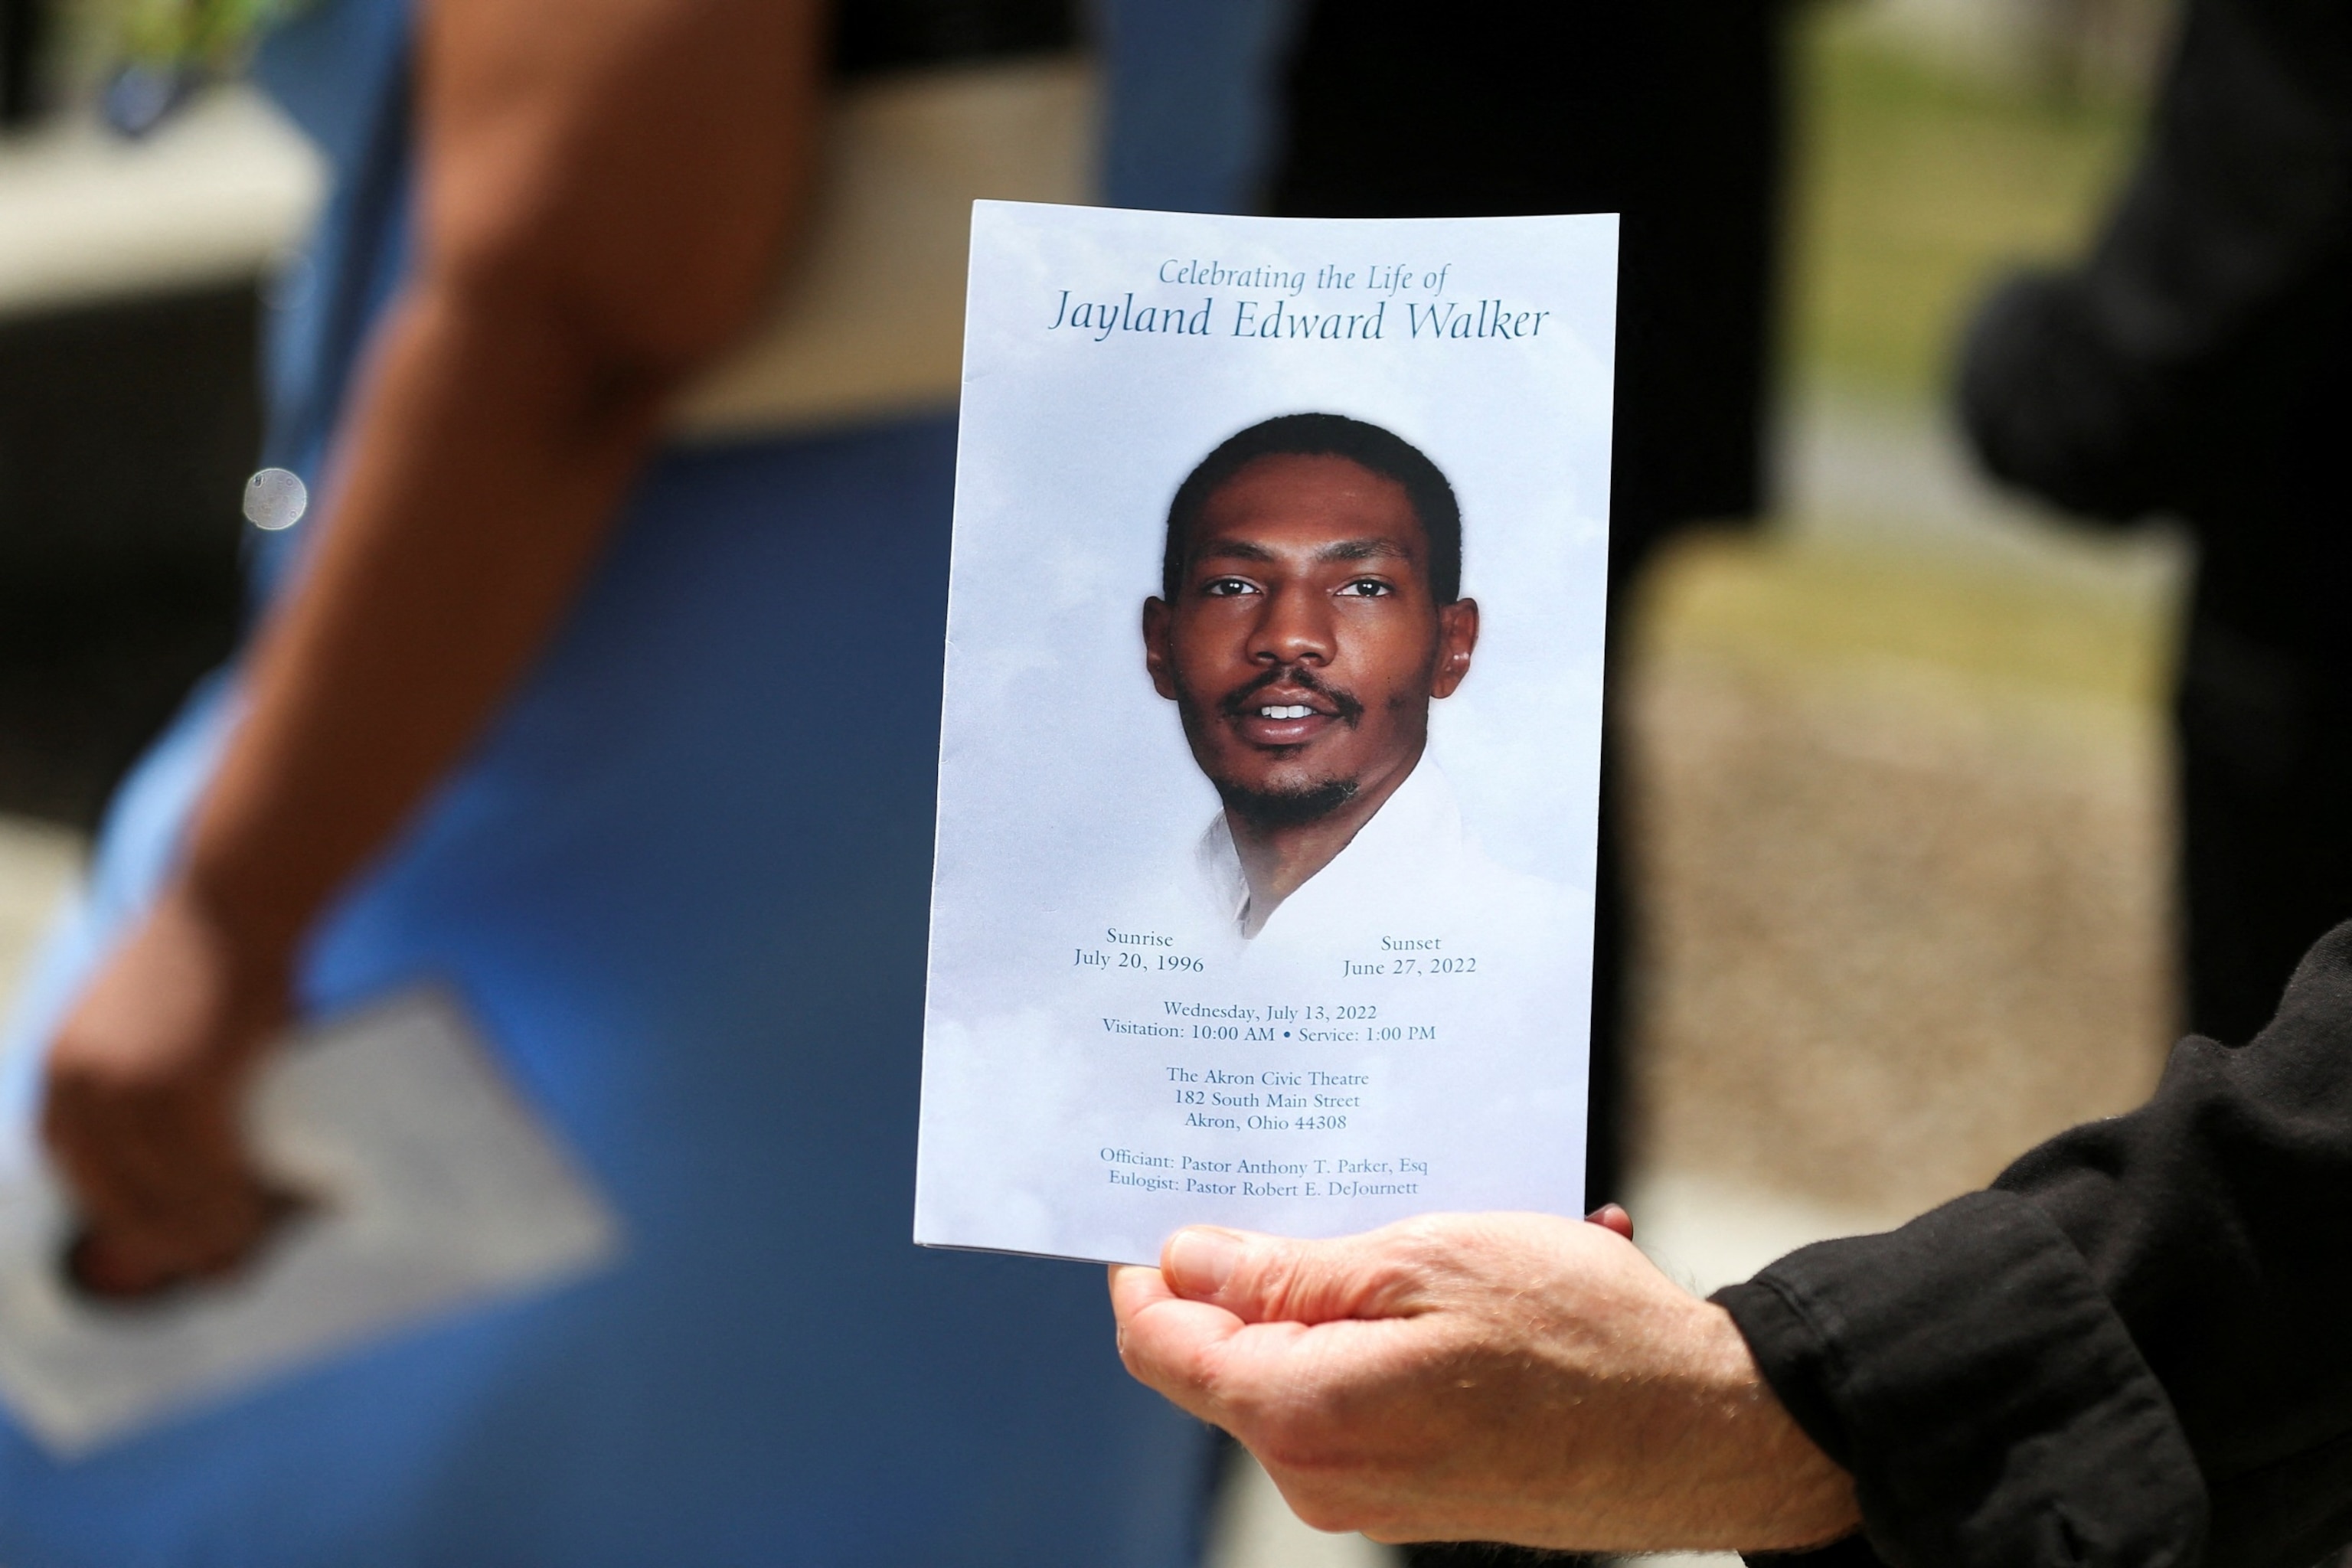 PHOTO: A man holds up the program following the funeral services for Jayland Walker, a 25 year old black man was shot to death by up to eight police officers on June 27, 2022, in Akron, Ohio, July 13, 2022. 